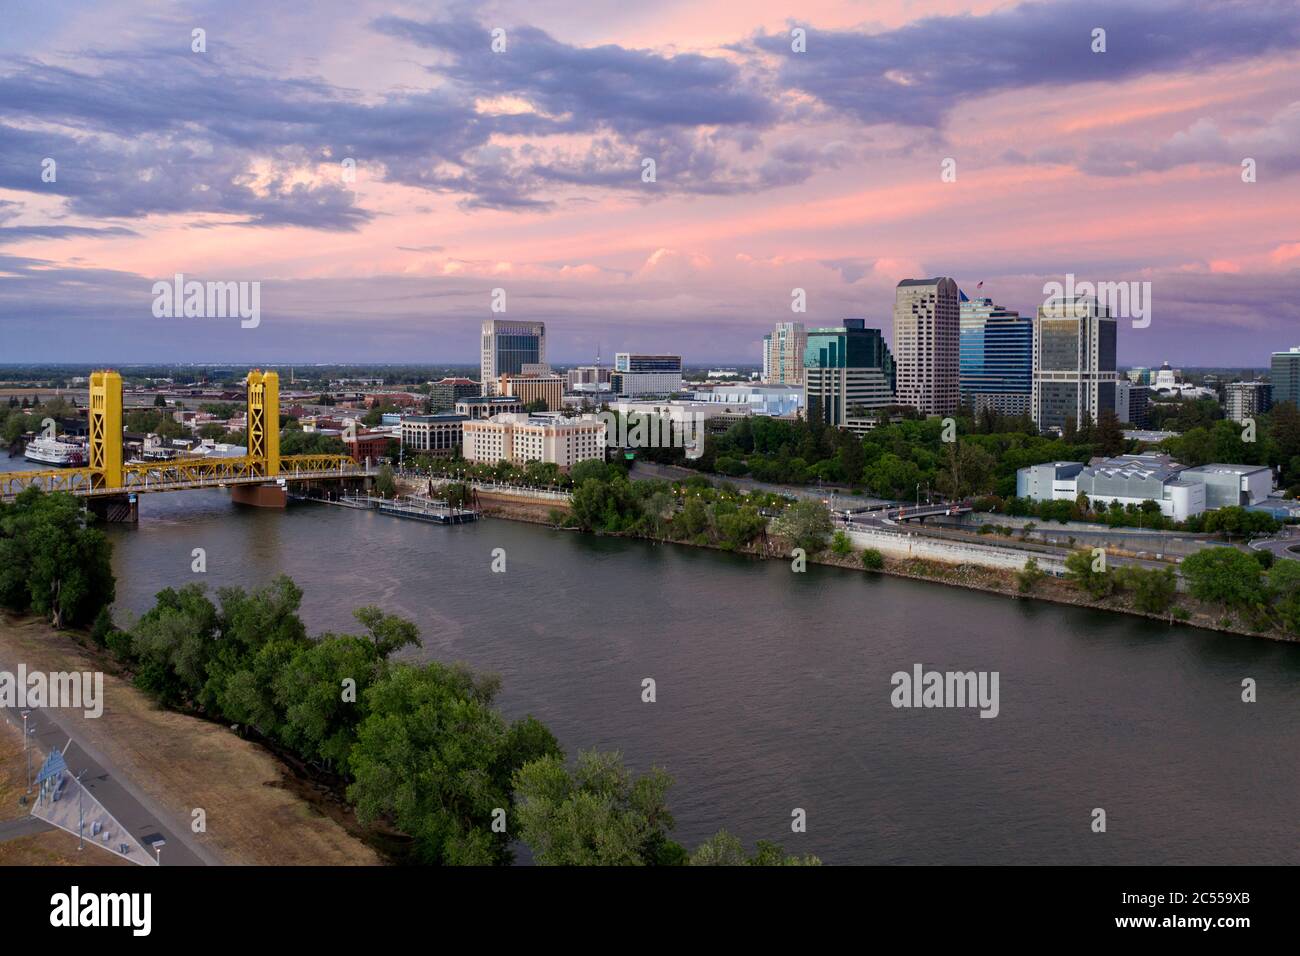 Aerial view of a pink sunset sky over downtown Sacramento, the river and the gold colored Tower Bridge Stock Photo